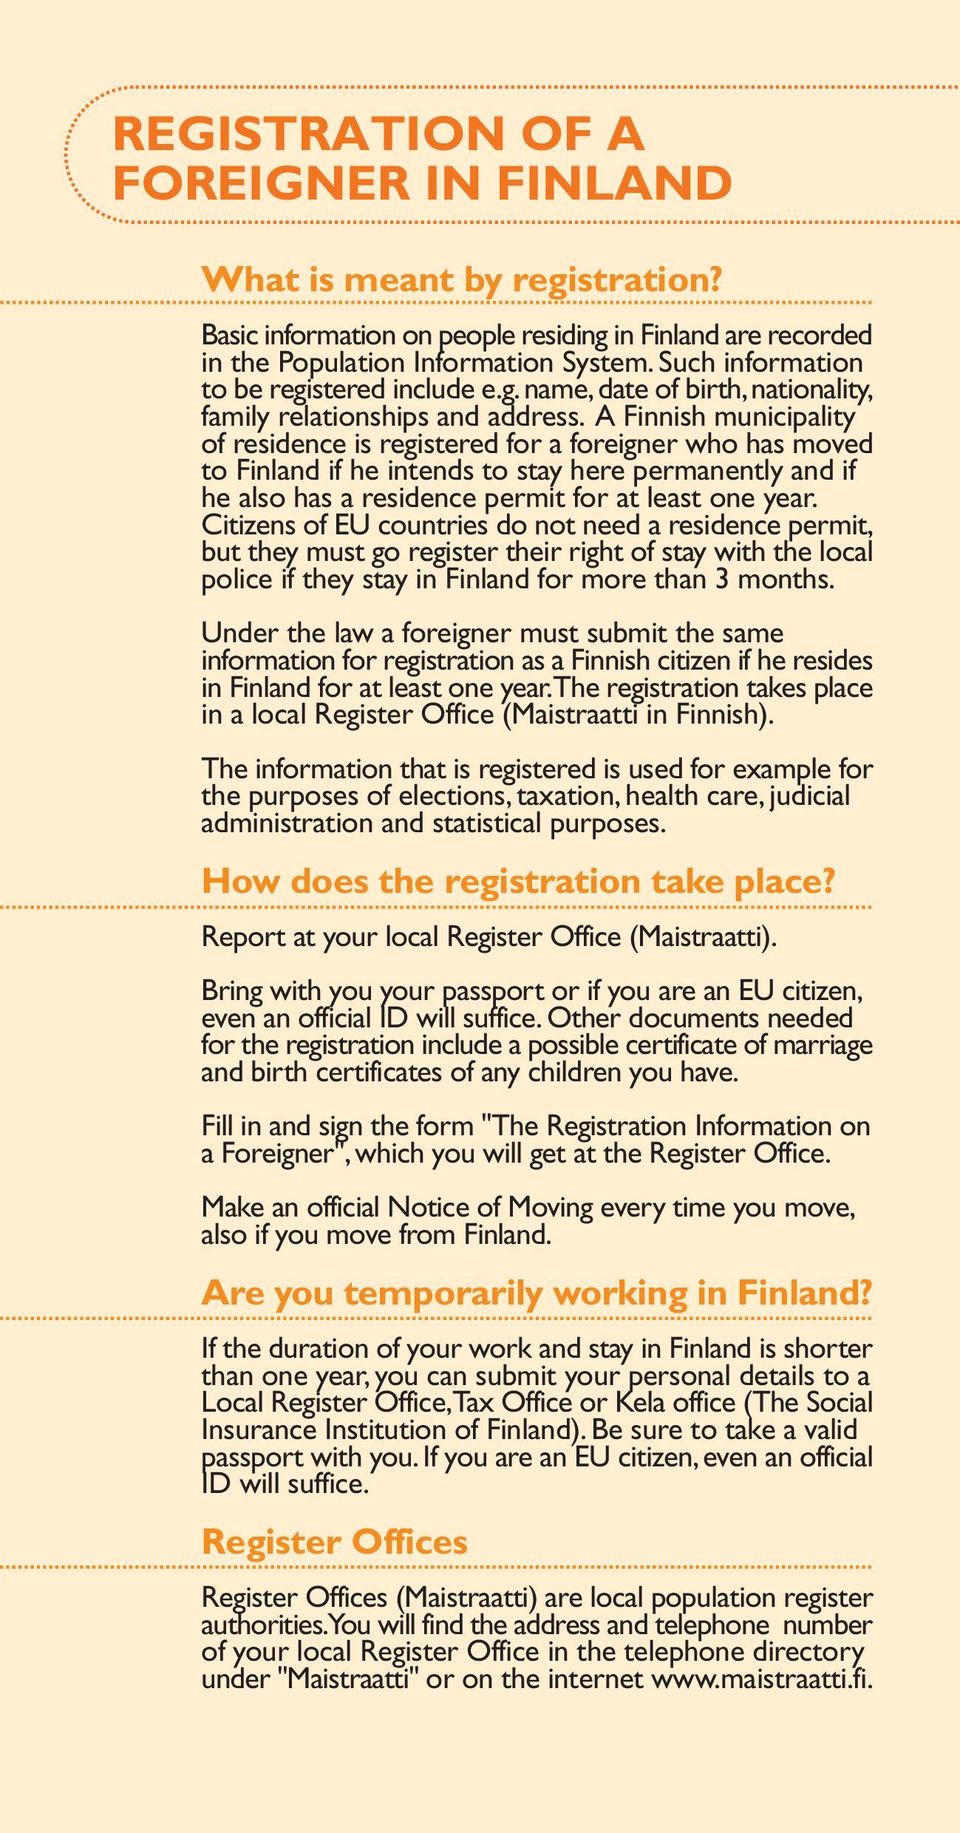 A Finnish municipality of residence is registered for a foreigner who has moved to Finland if he intends to stay here permanently and if he also has a residence permit for at least one year.